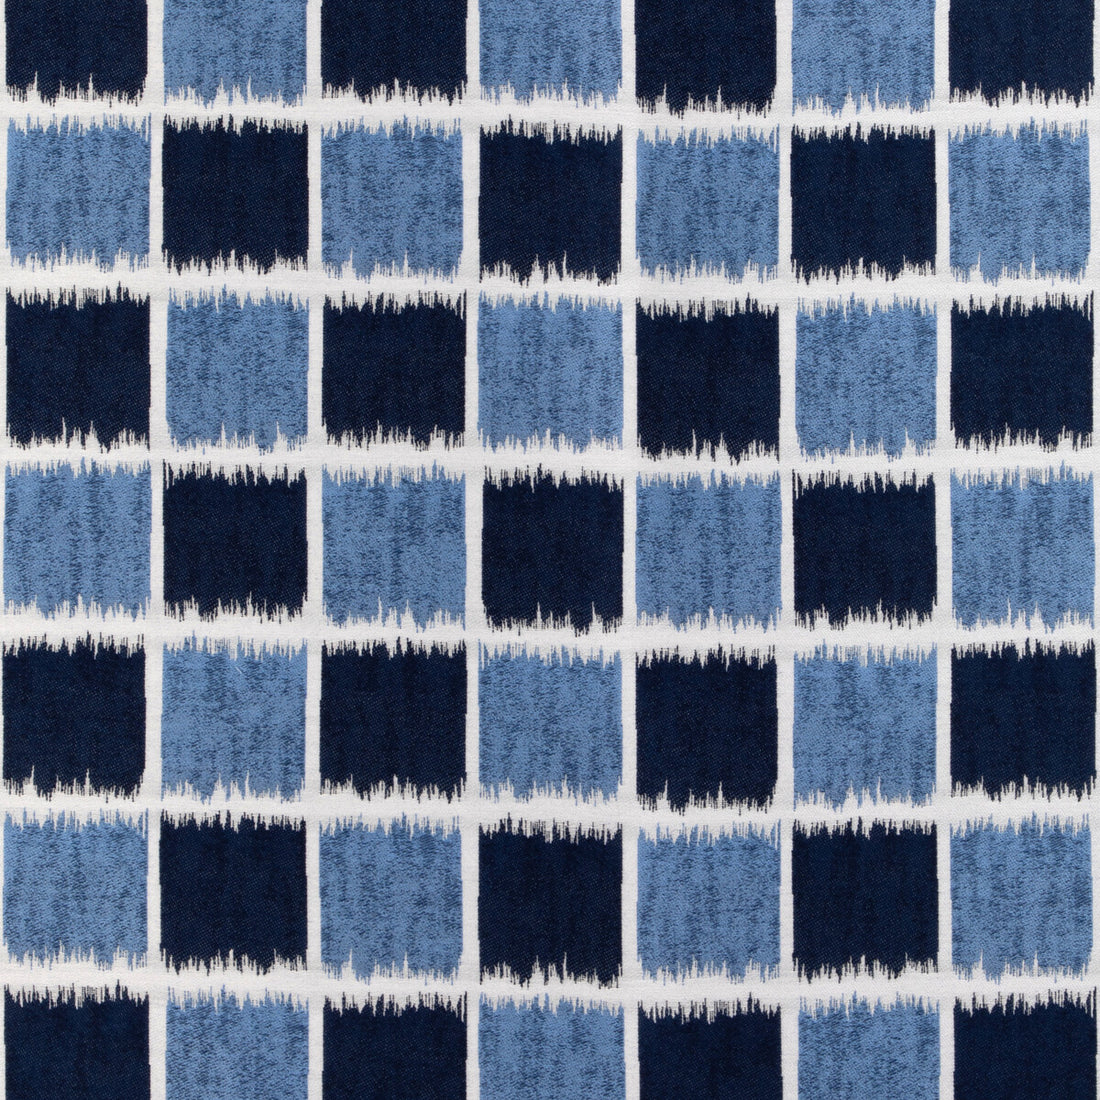 Ikat Squares fabric in marine color - pattern 36936.5.0 - by Kravet Couture in the Riviera collection